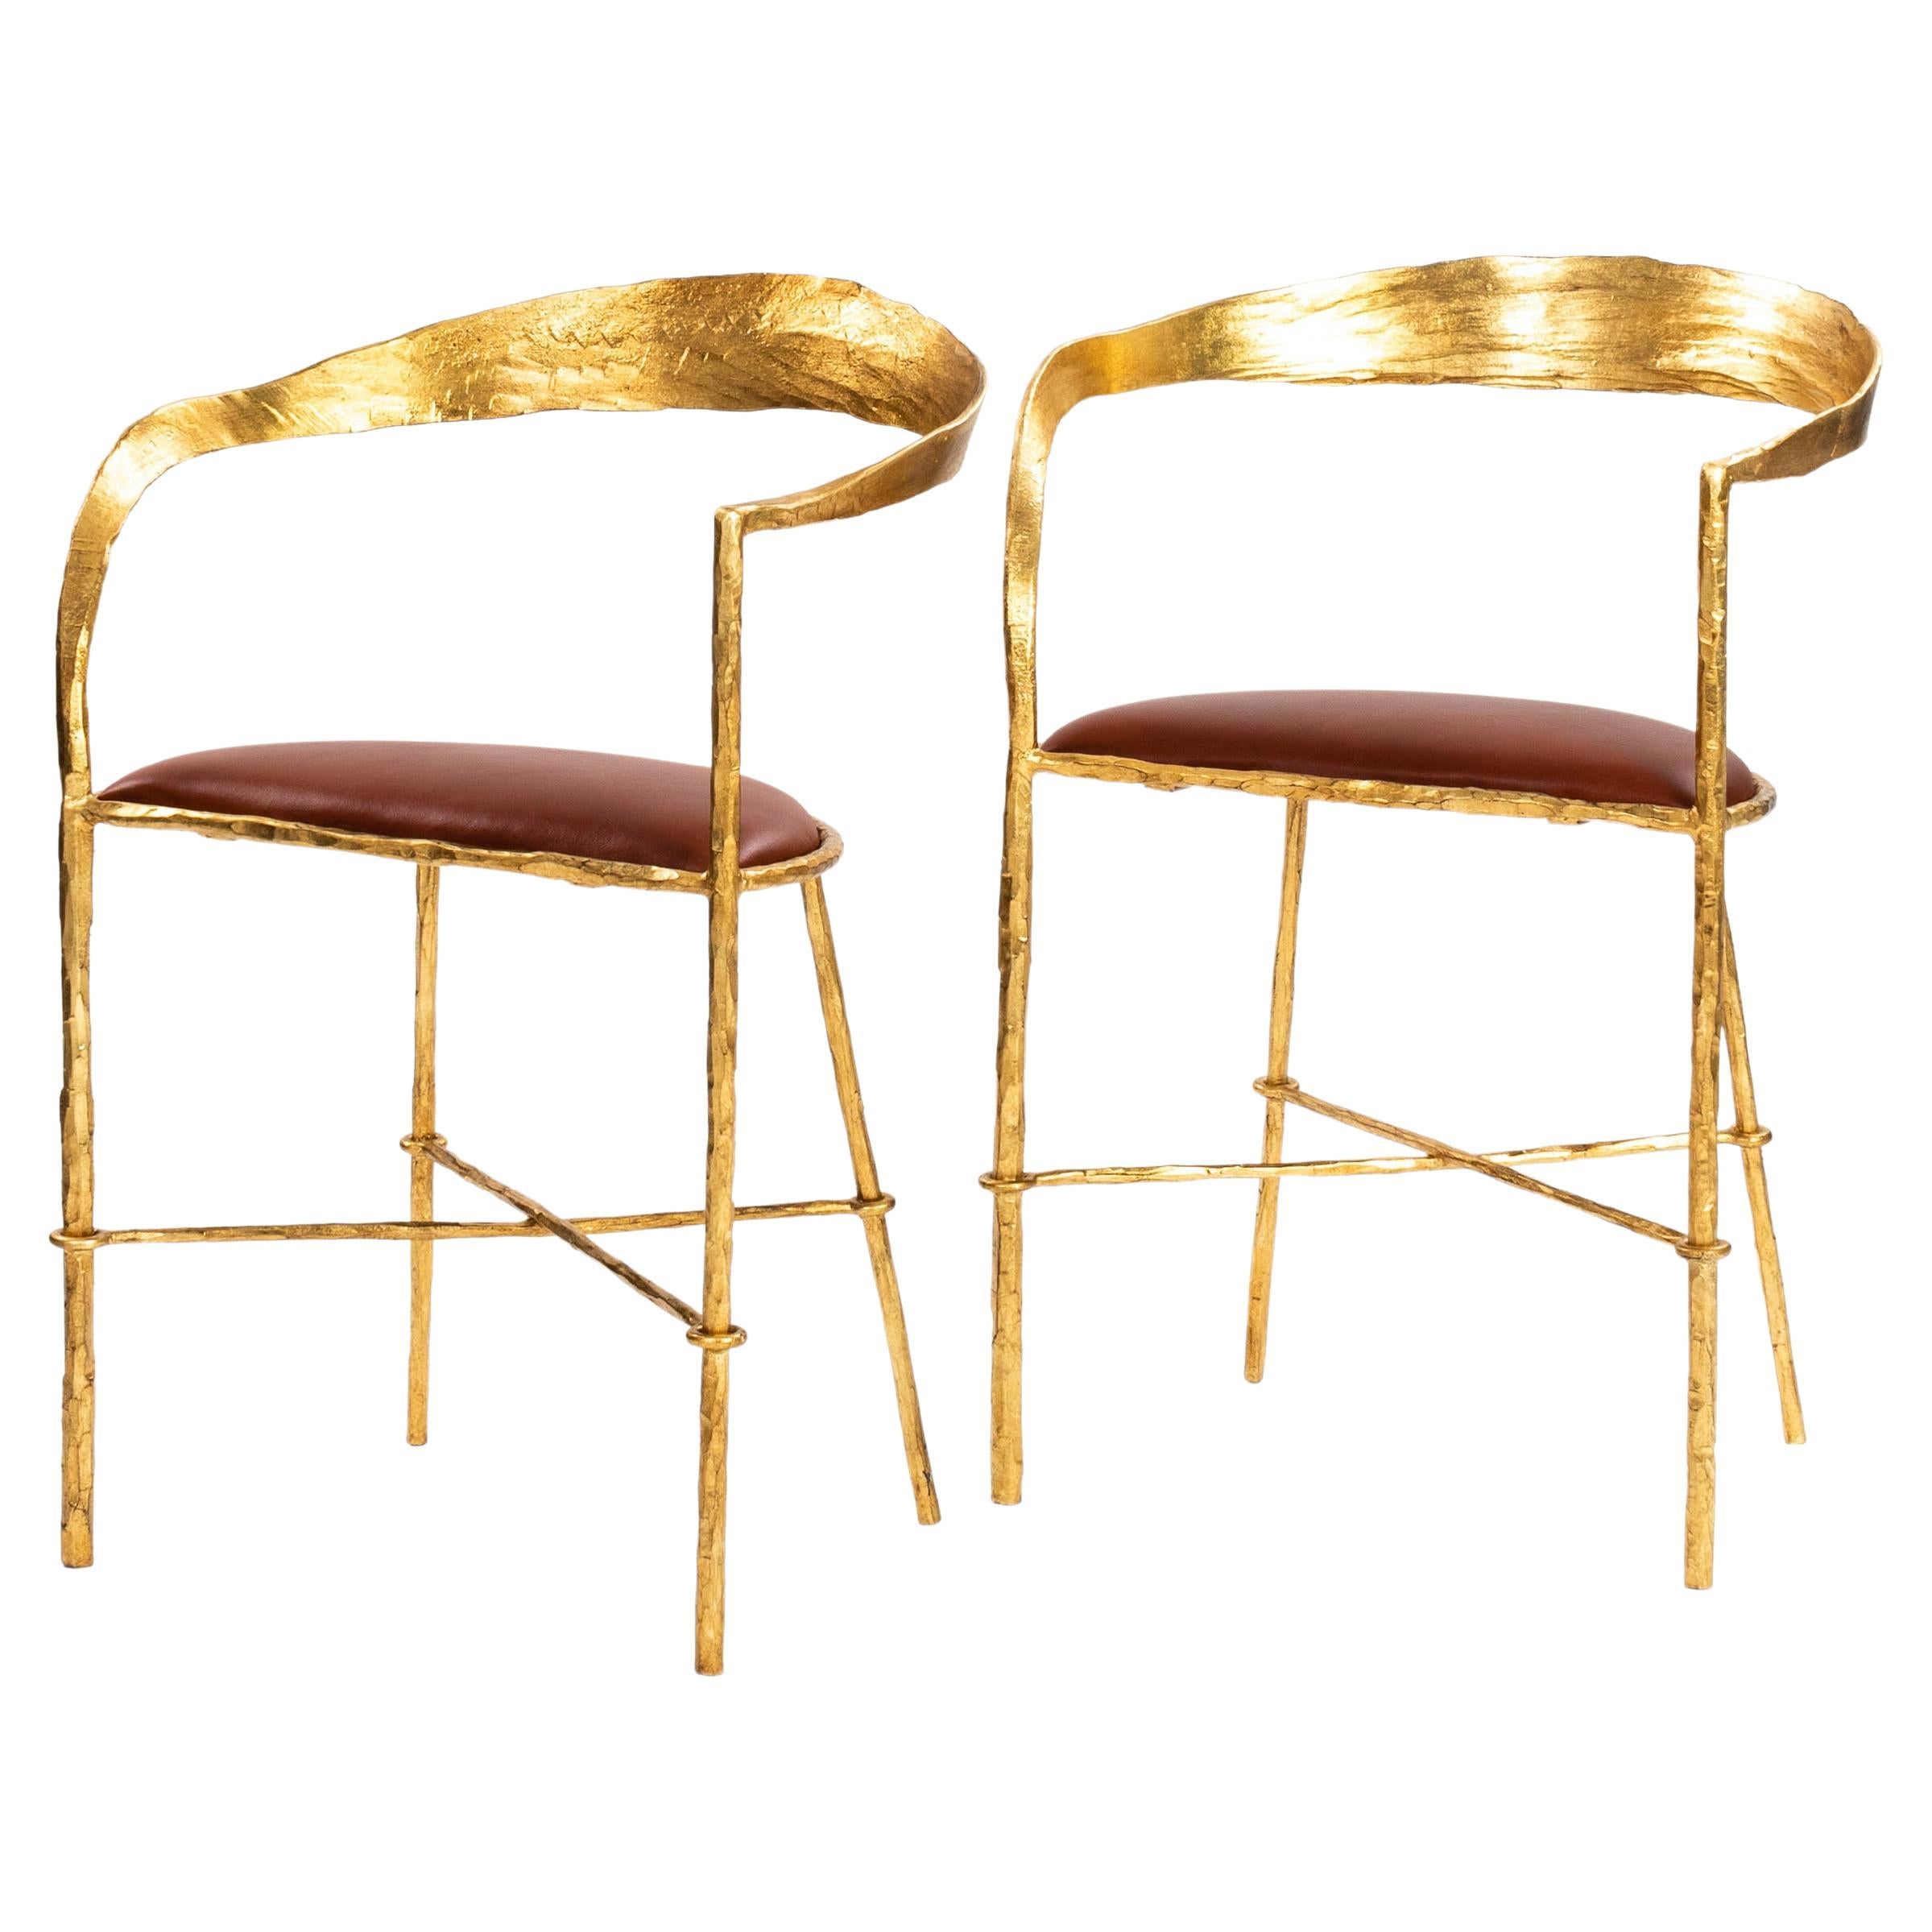 Pair of Hand Forged Gold Plated Mid-Century Armchairs by Banci Florence 1970s For Sale